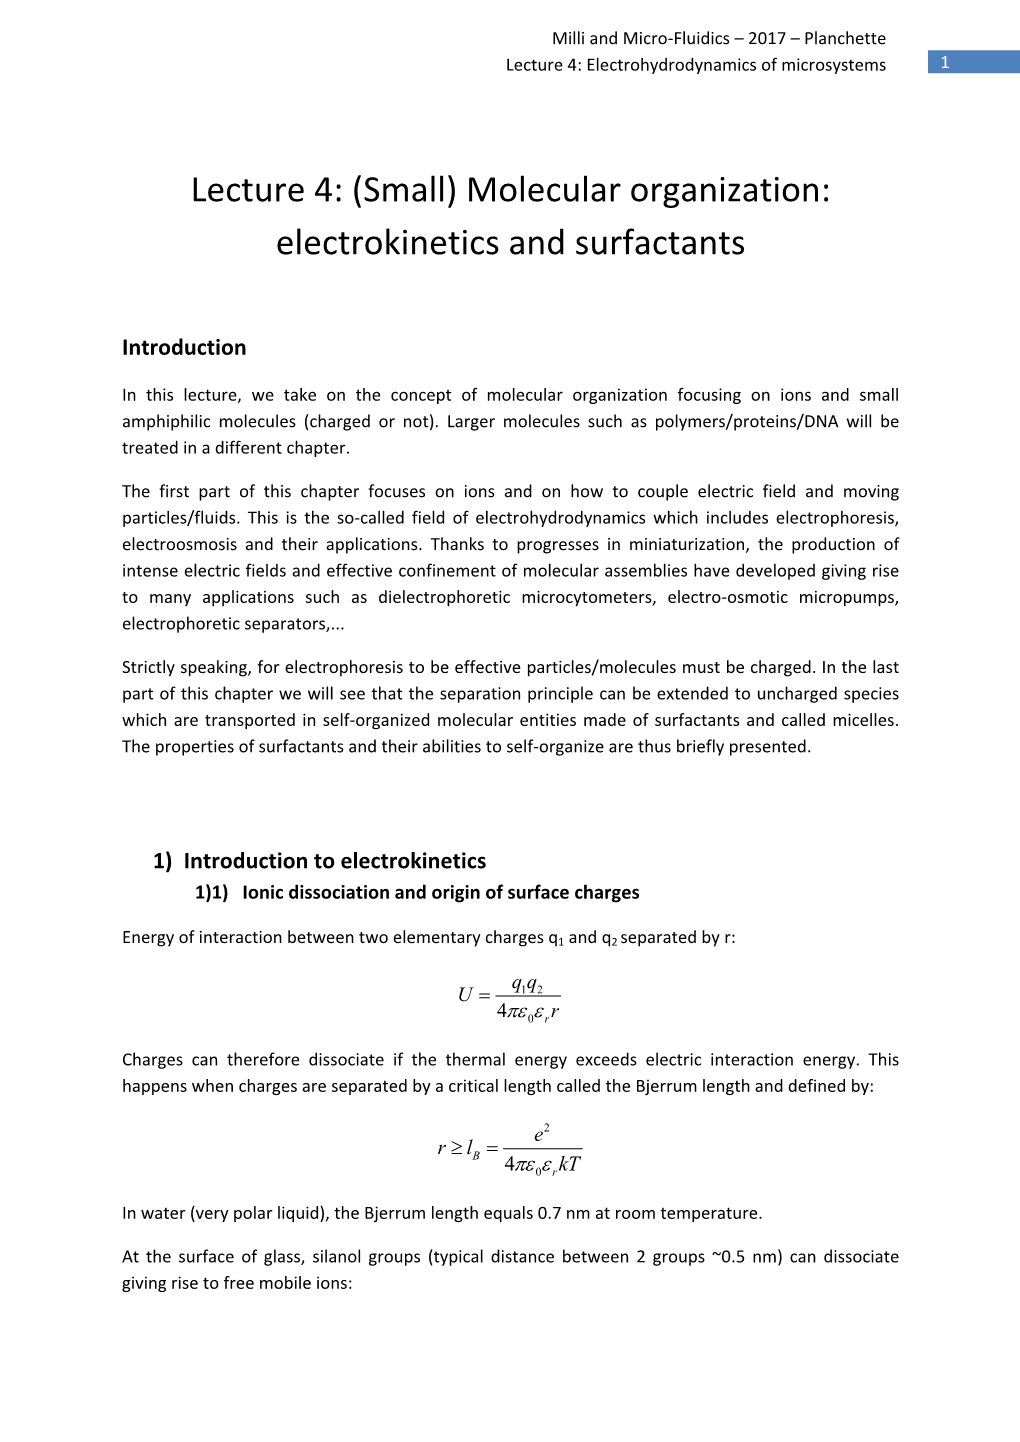 Lecture 4: (Small) Molecular Organization: Electrokinetics and Surfactants